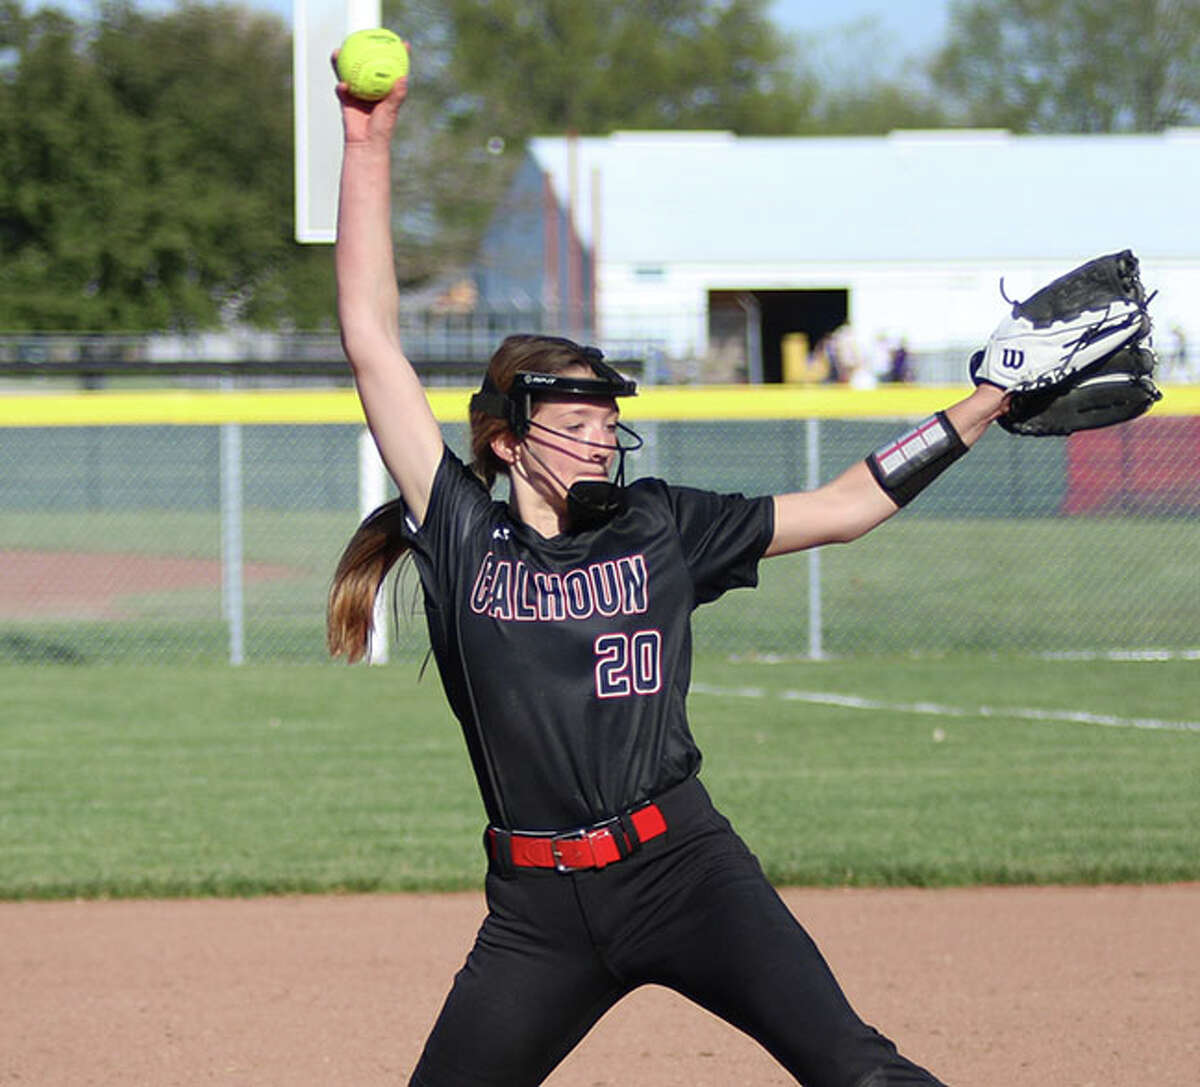 Calhoun's Kylie Angel, shown in a game last season, pitched five innings to earn the win Thursday in the Warriors' season-opening victory at Carlinville.